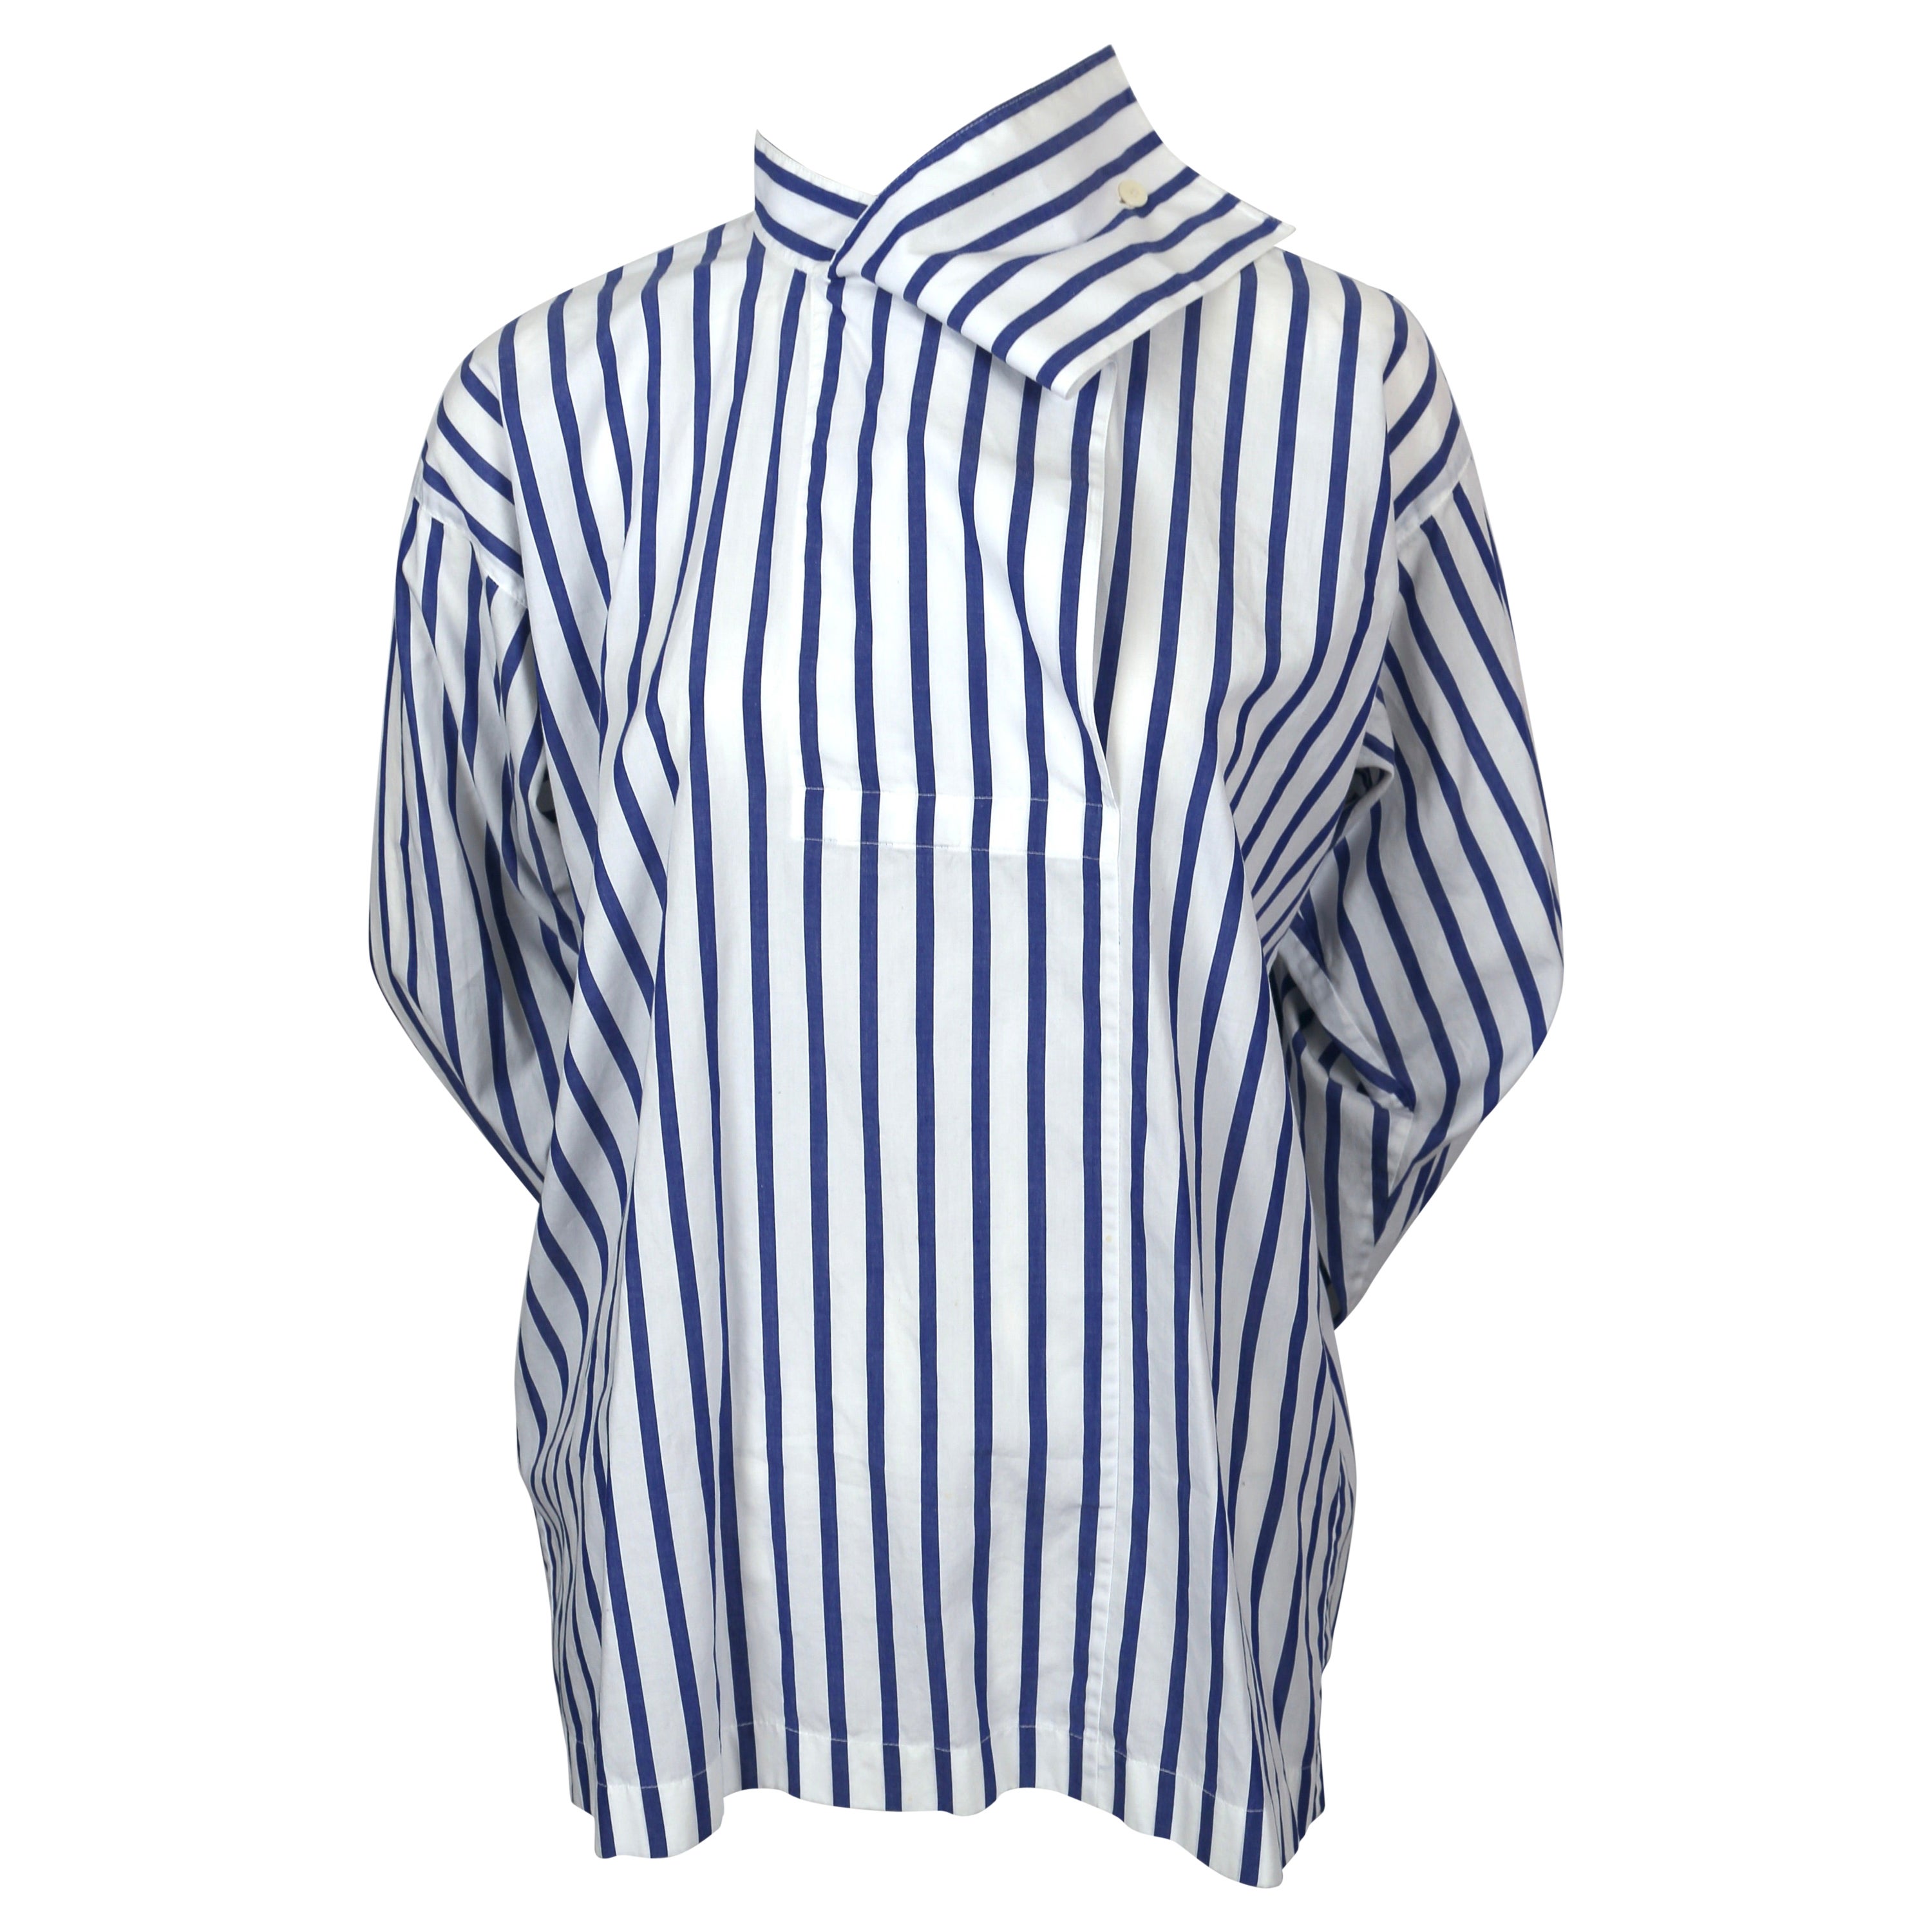 1980's ISSEY MIYAKE blue and white striped cotton shirt with draped neckline For Sale